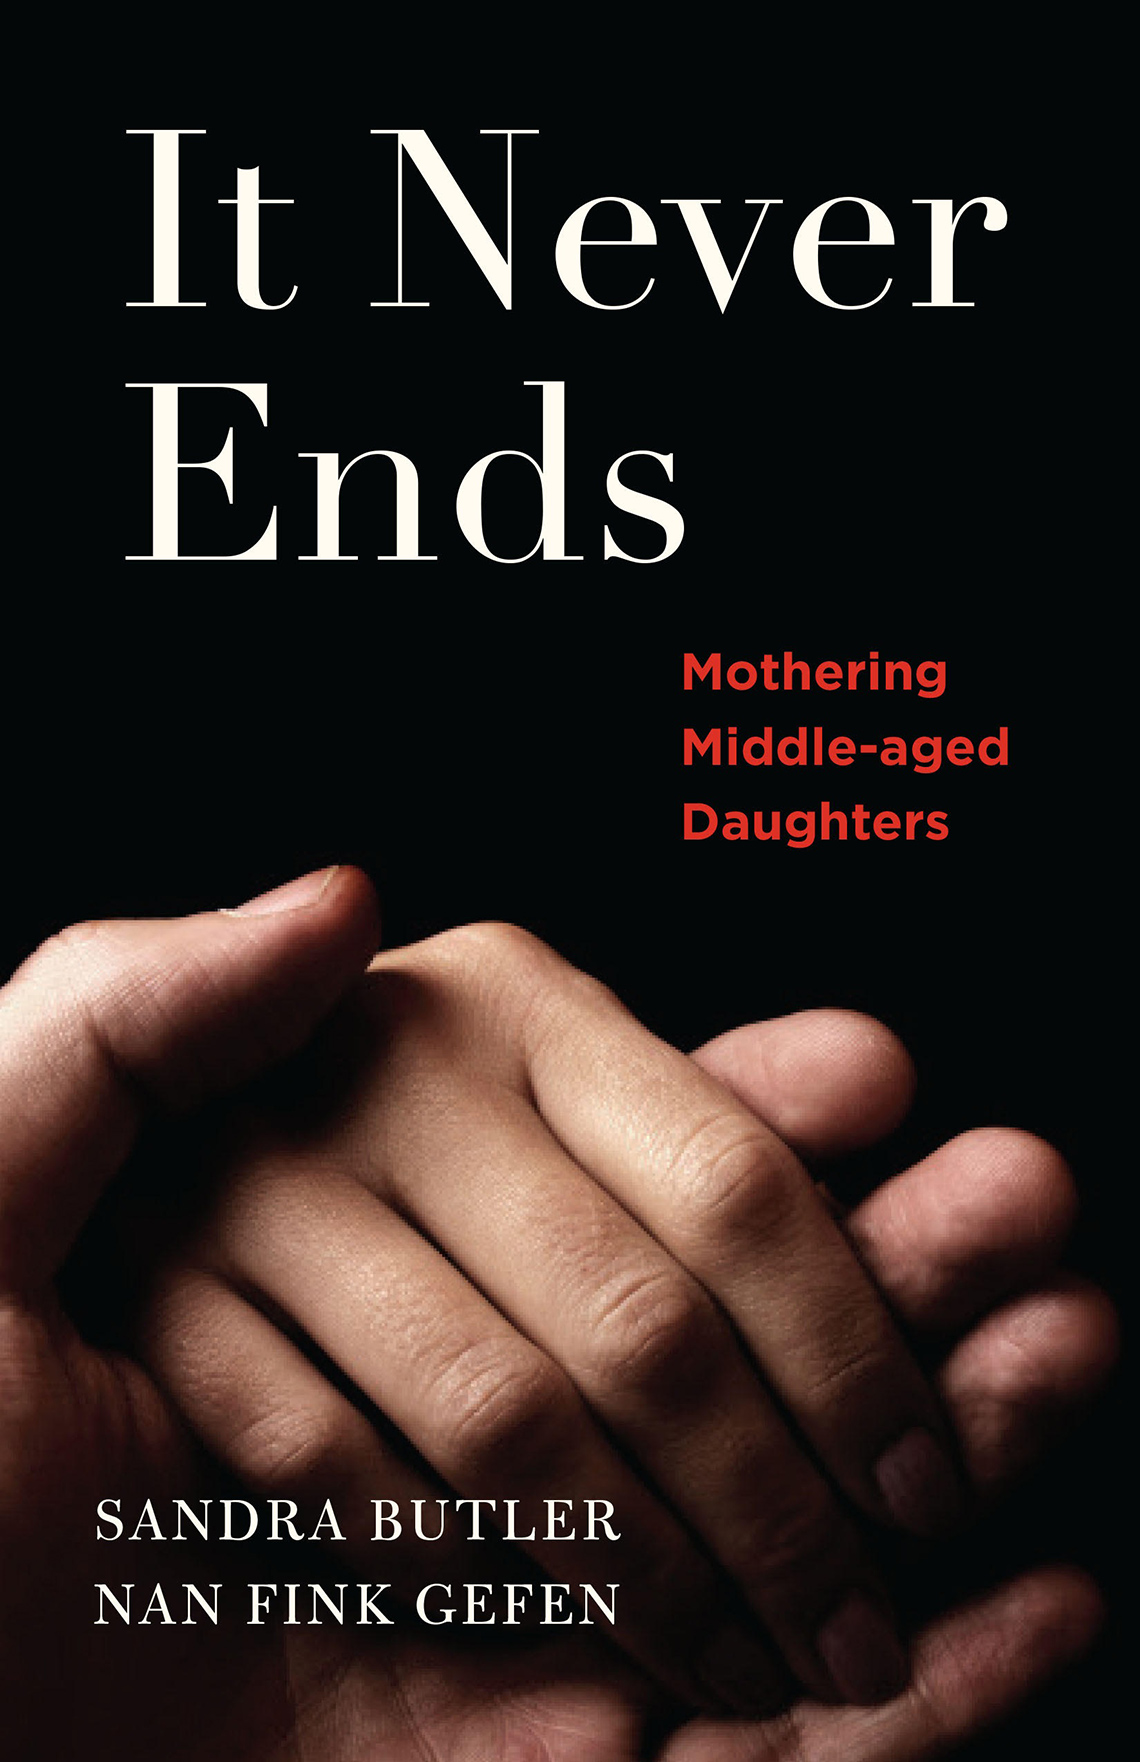 'It Never Ends: Mothering Middle-aged Daughters', by Sandra Butler and Nan Fink Gefen